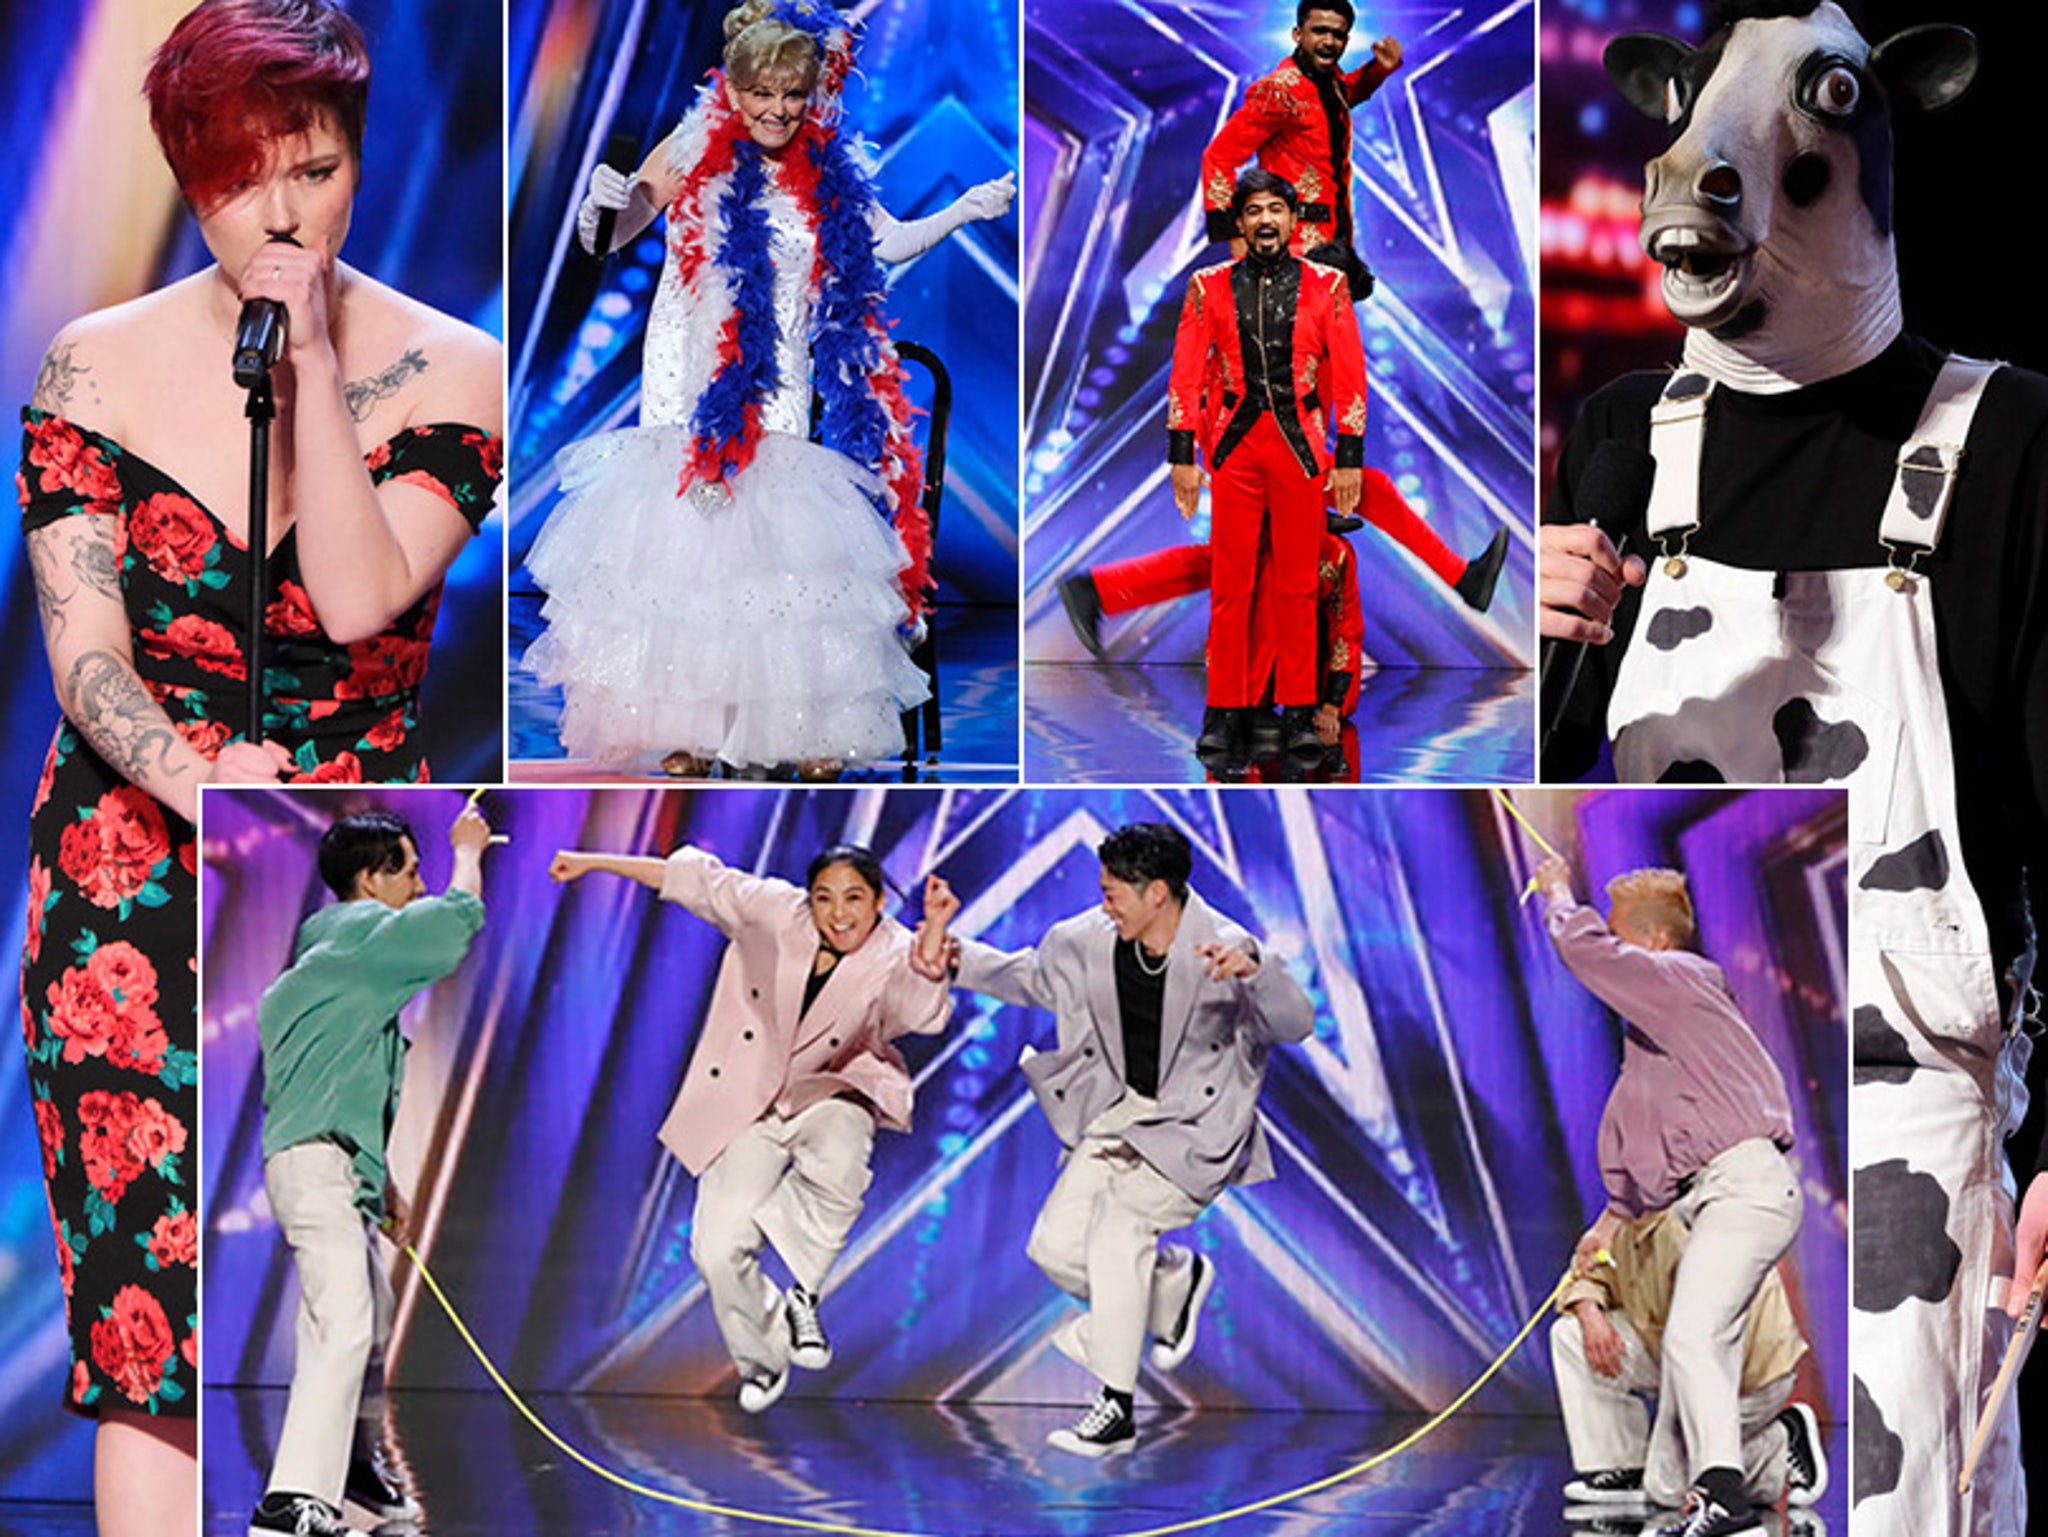 Who are the wildcard acts on America's Got Talent?